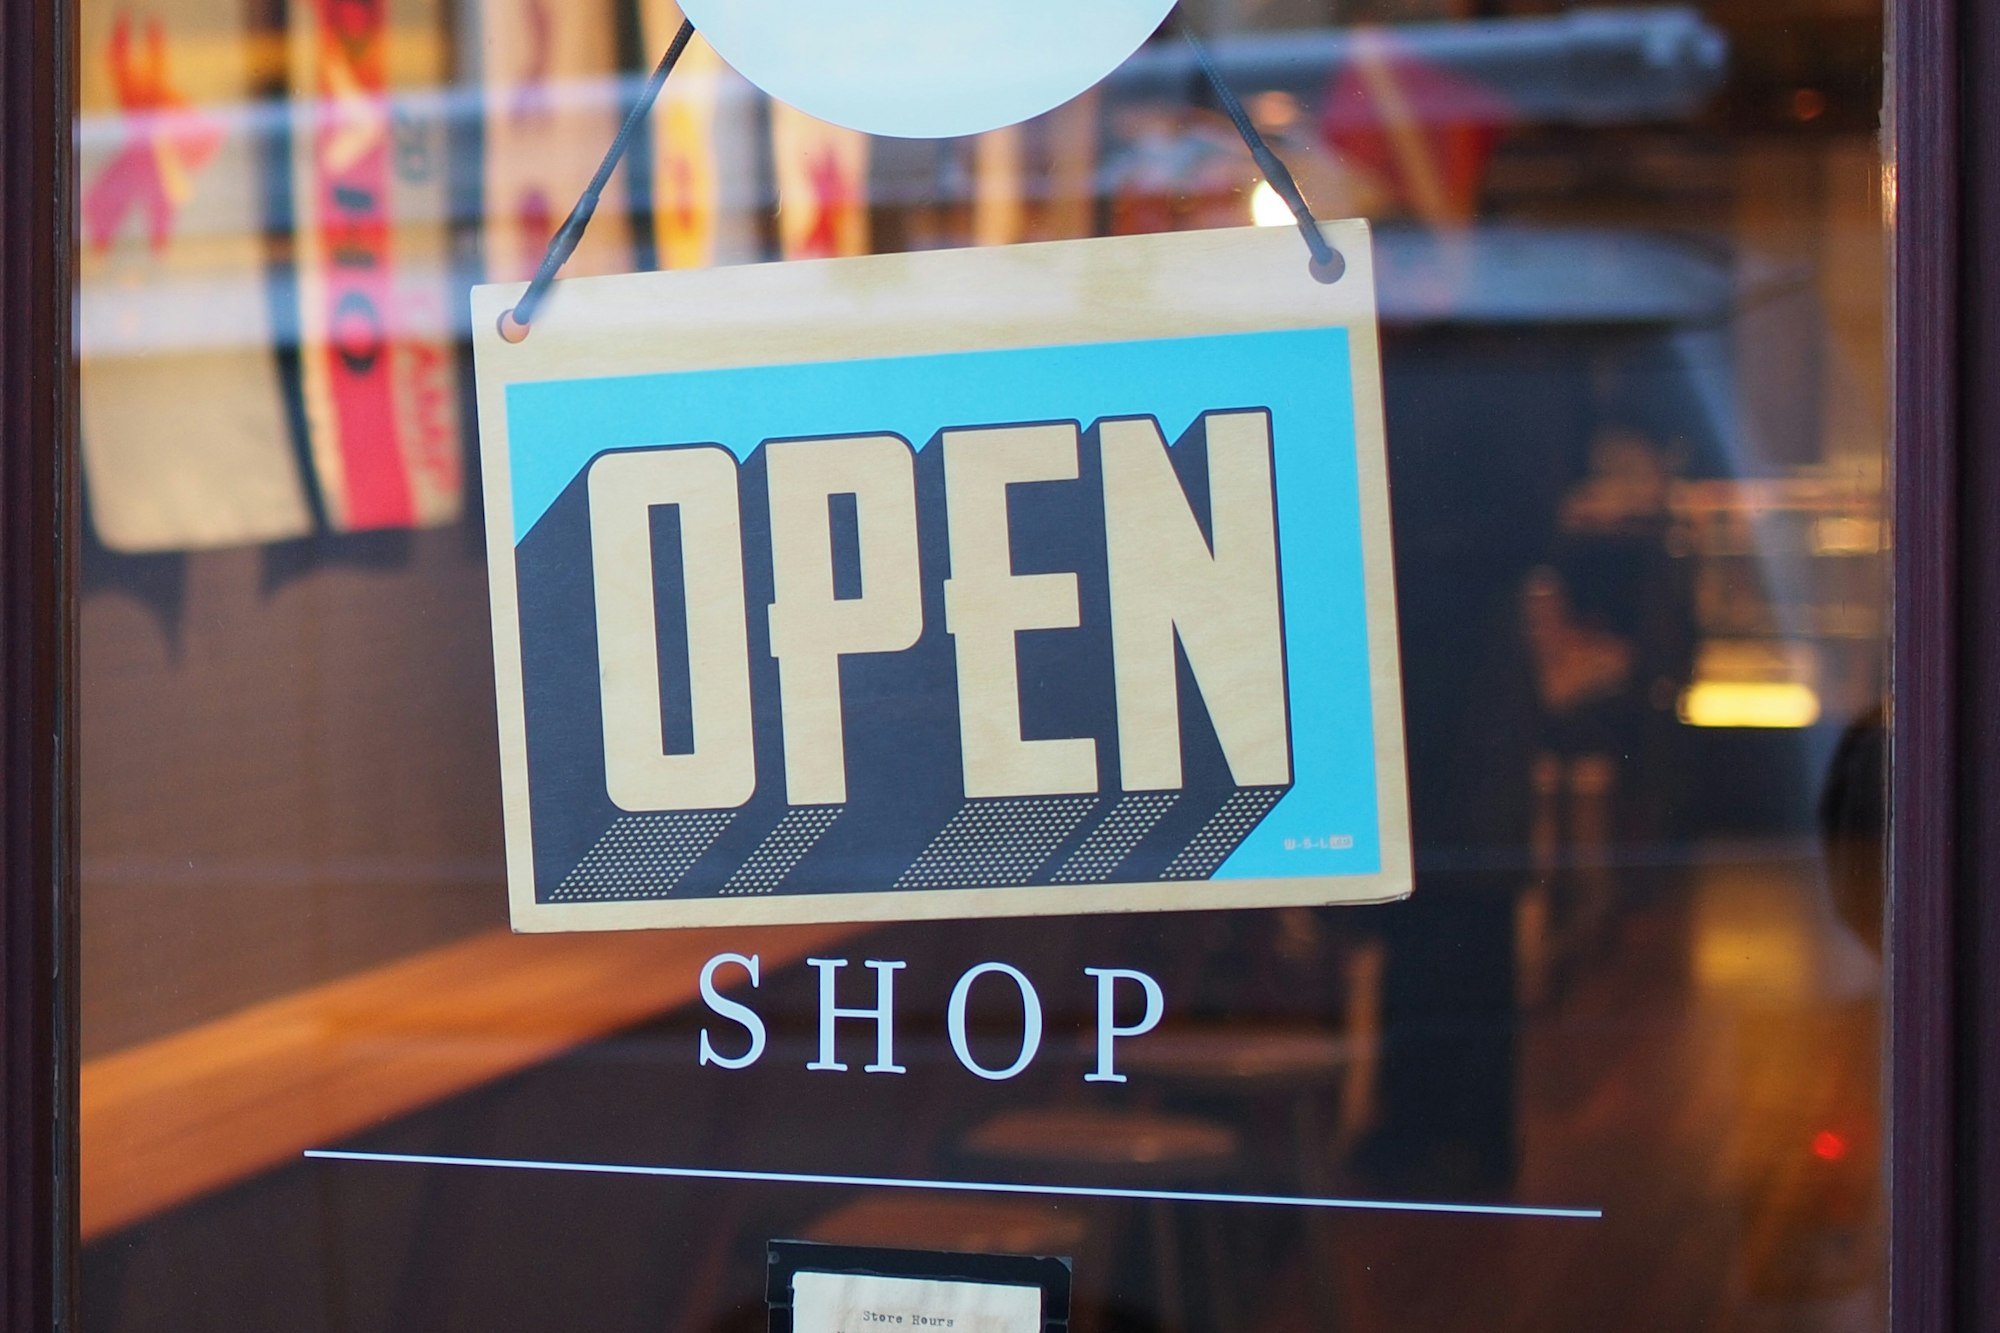 5 Things Need to Consider Before Starting an E-Commerce Business